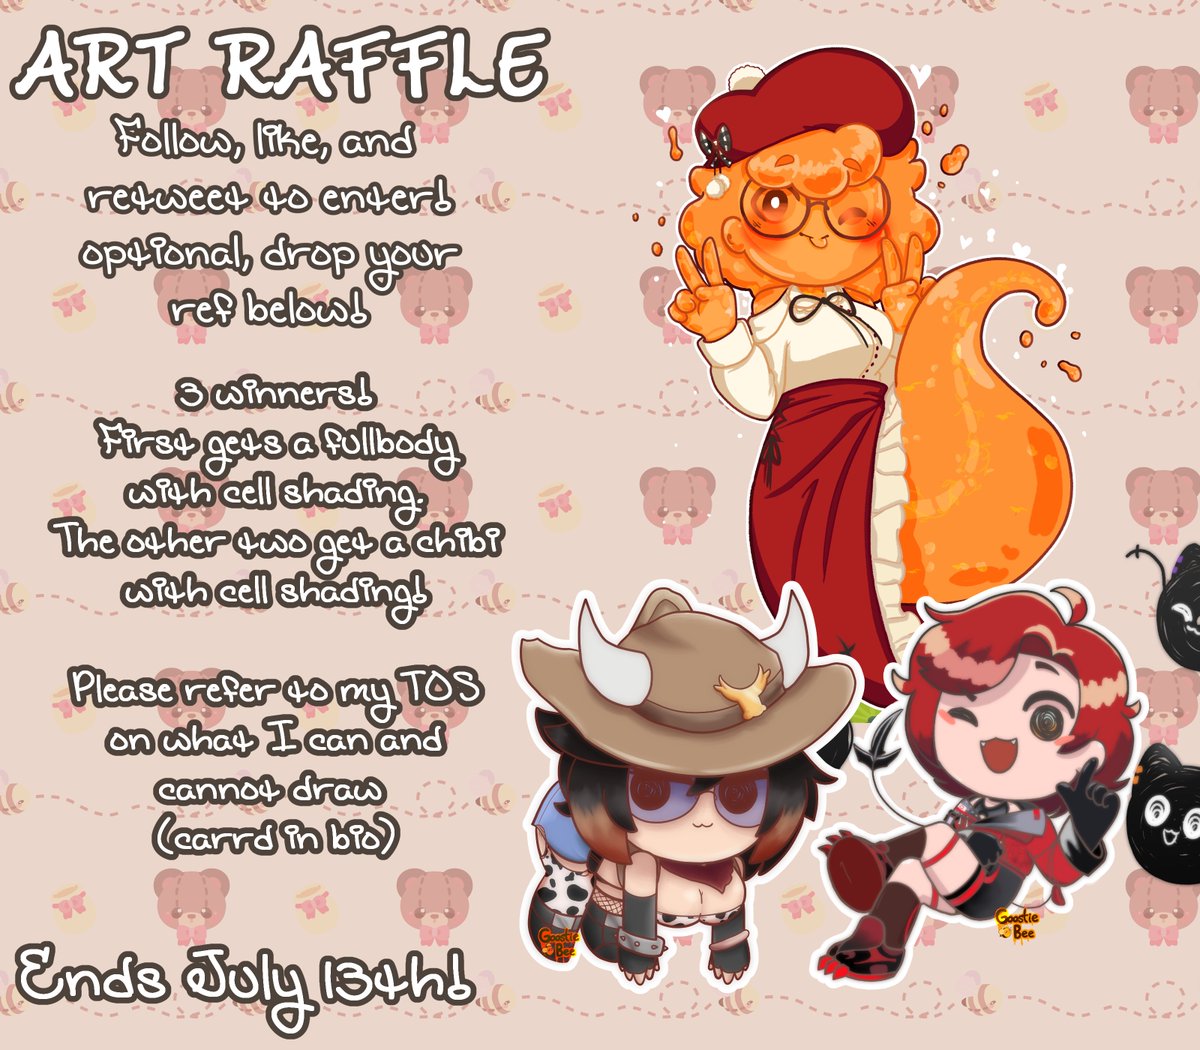 ART RAFFLE!!!
To celebrate reaching 200 followers, I will be picking 3 people from this! The first will win a fullbody, and the other two, a chibi

Rules:
◦Follow, like, and retweet
◦OPTIONAL: drop your ref below

ENDS JULY 13TH
#pngtuber #Vtuber #VTuberUprising #artraffle